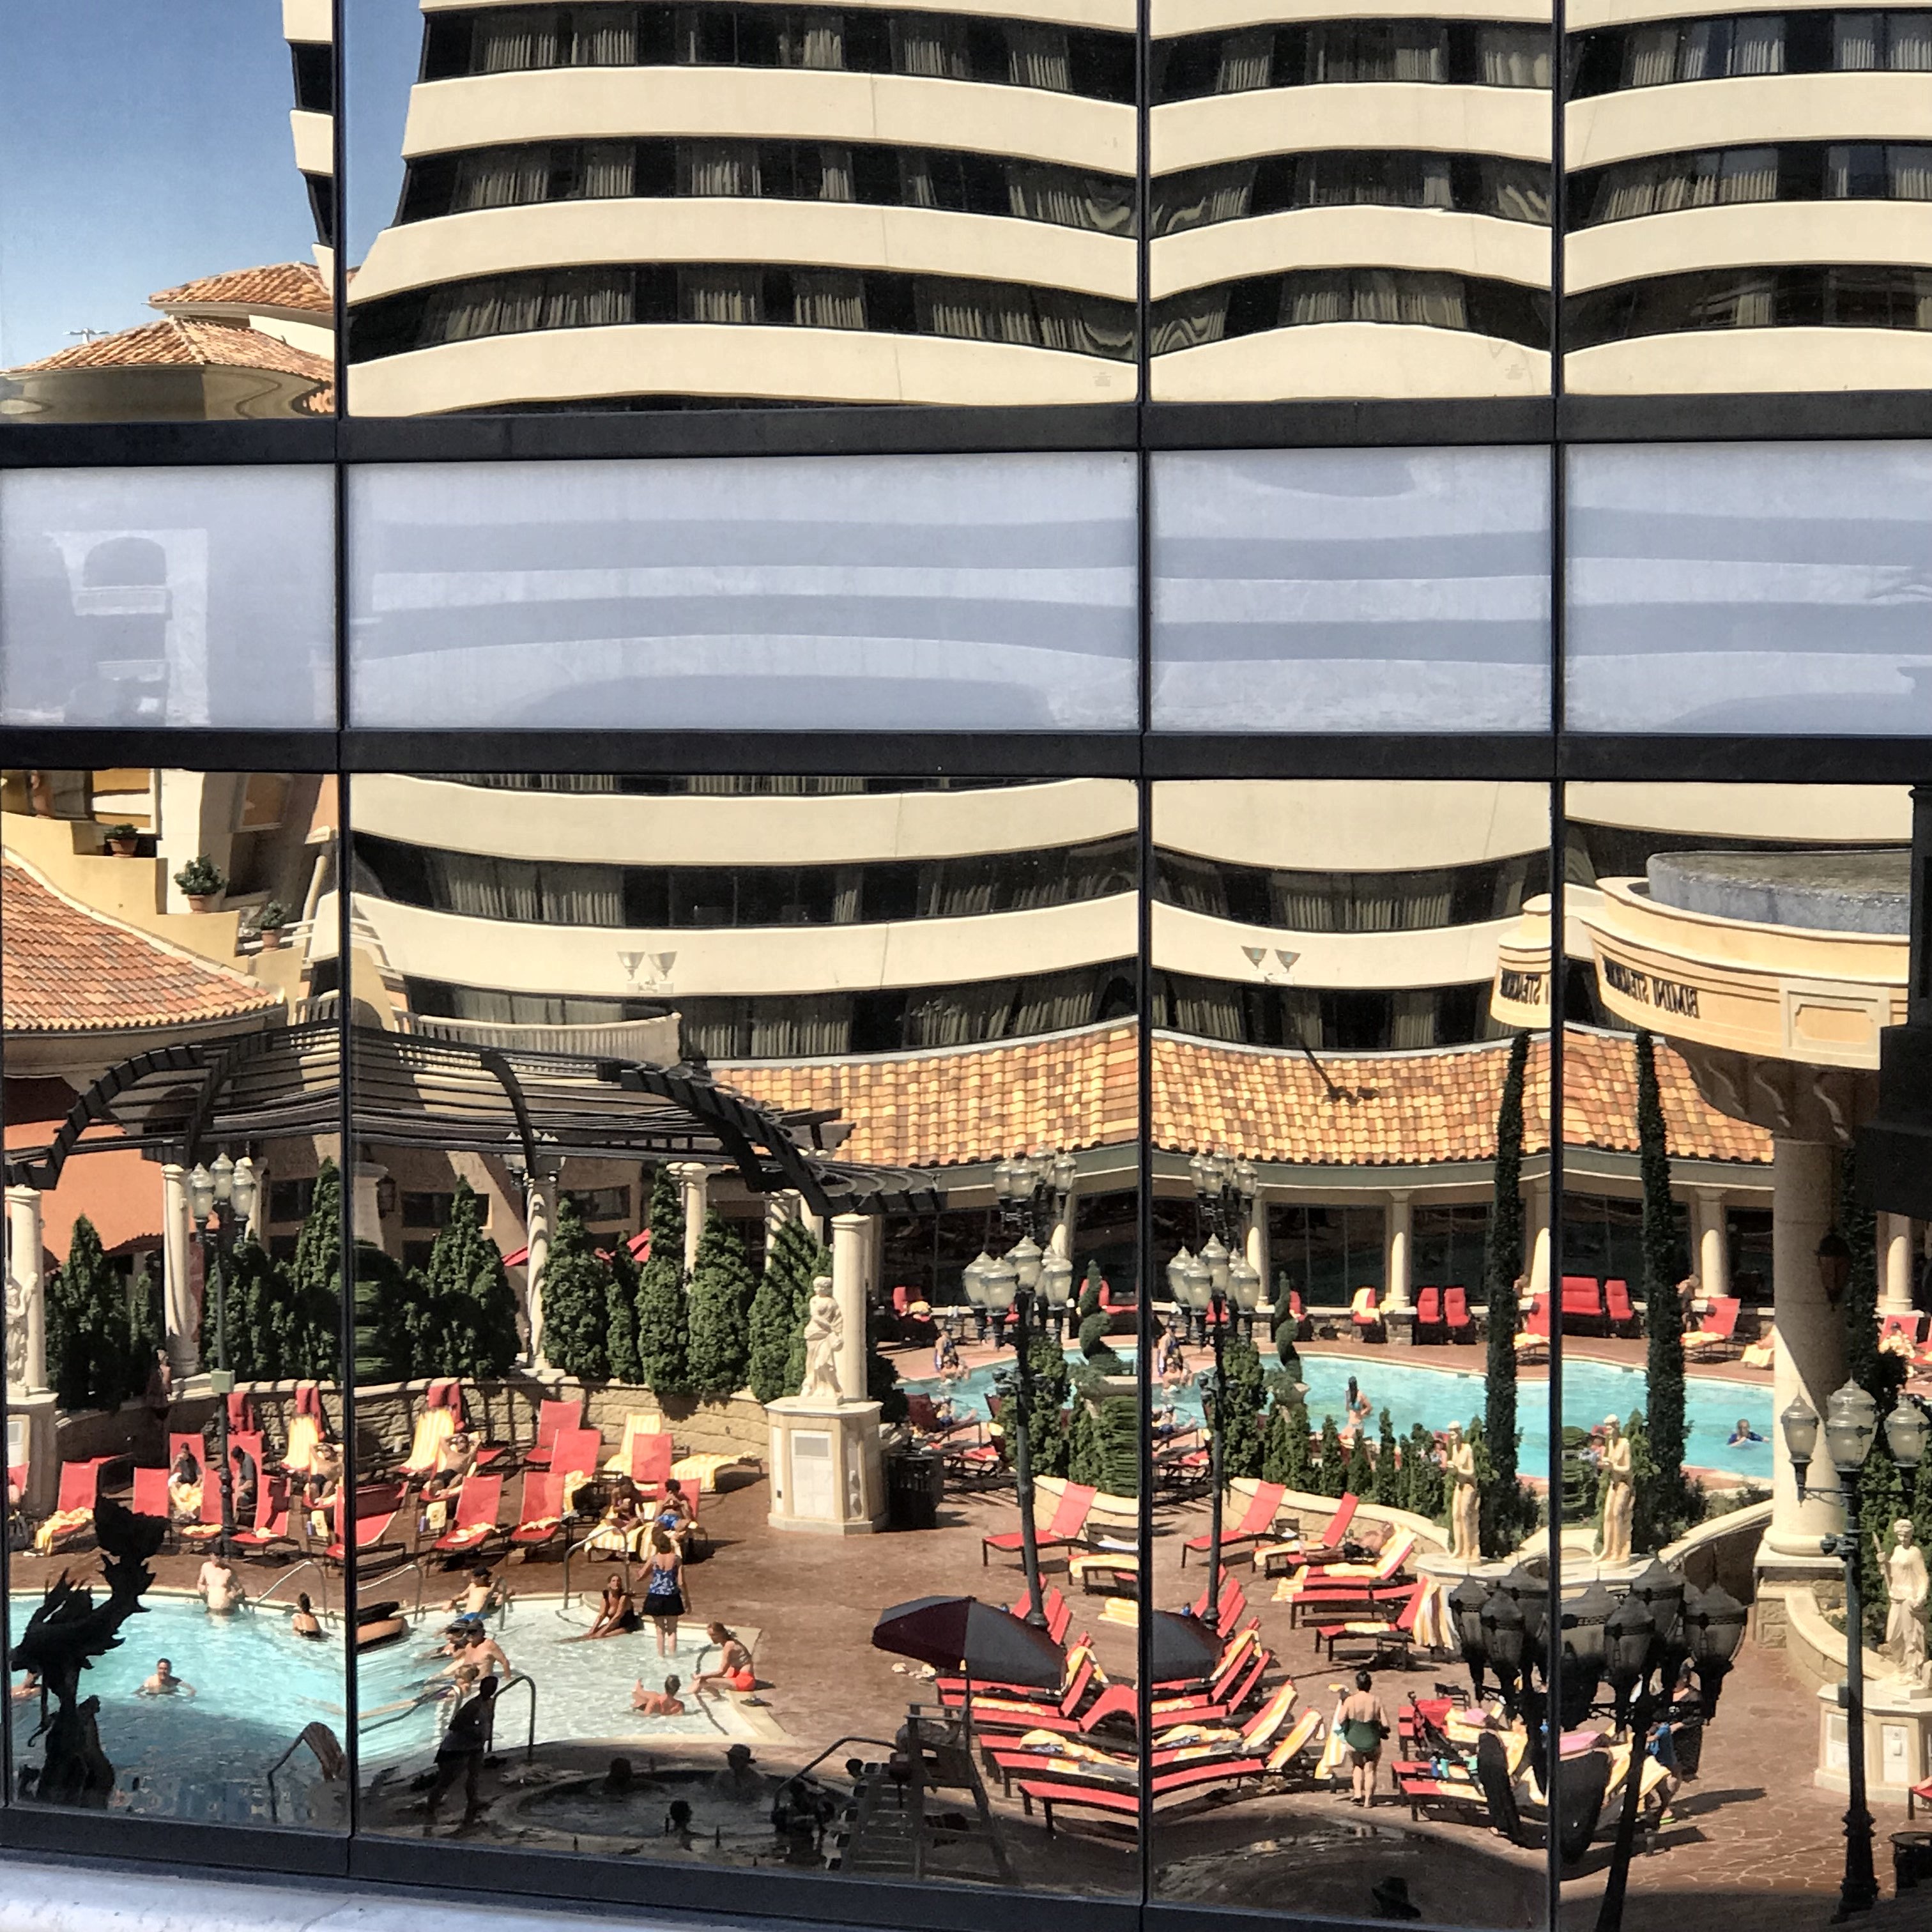  (digital photograph) the pool reflection seen from spa balcony 